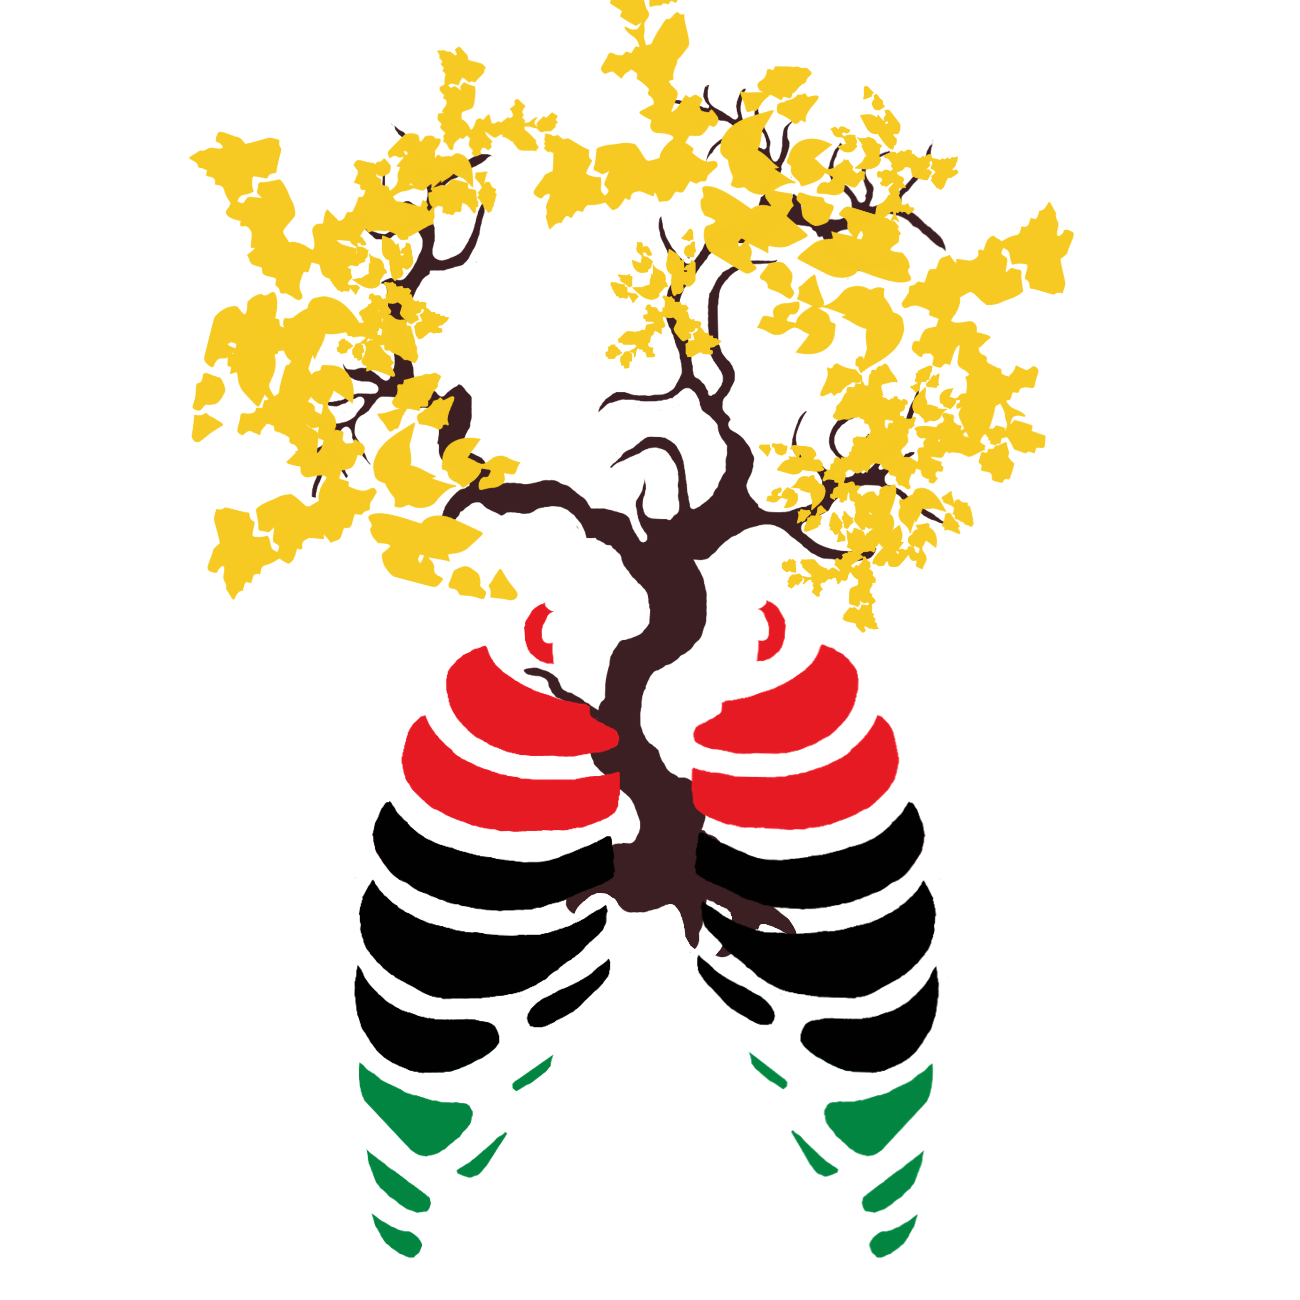 golden tree growing from red green and black ribs